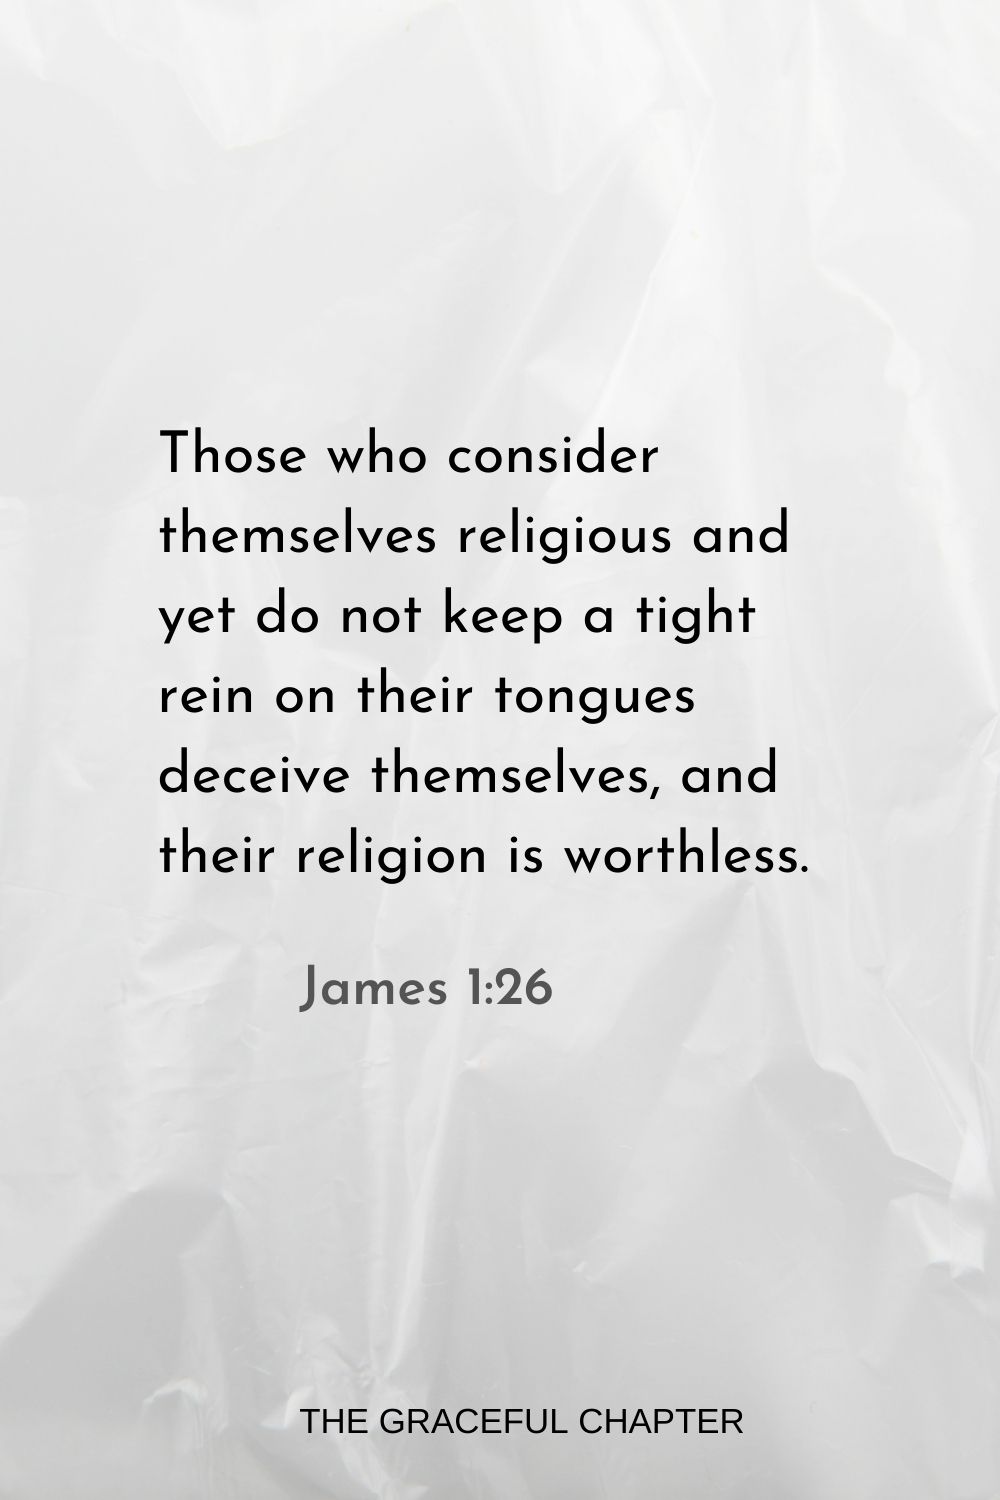 Those who consider themselves religious and yet do not keep a tight rein on their tongues deceive themselves, and their religion is worthless. James 1:26